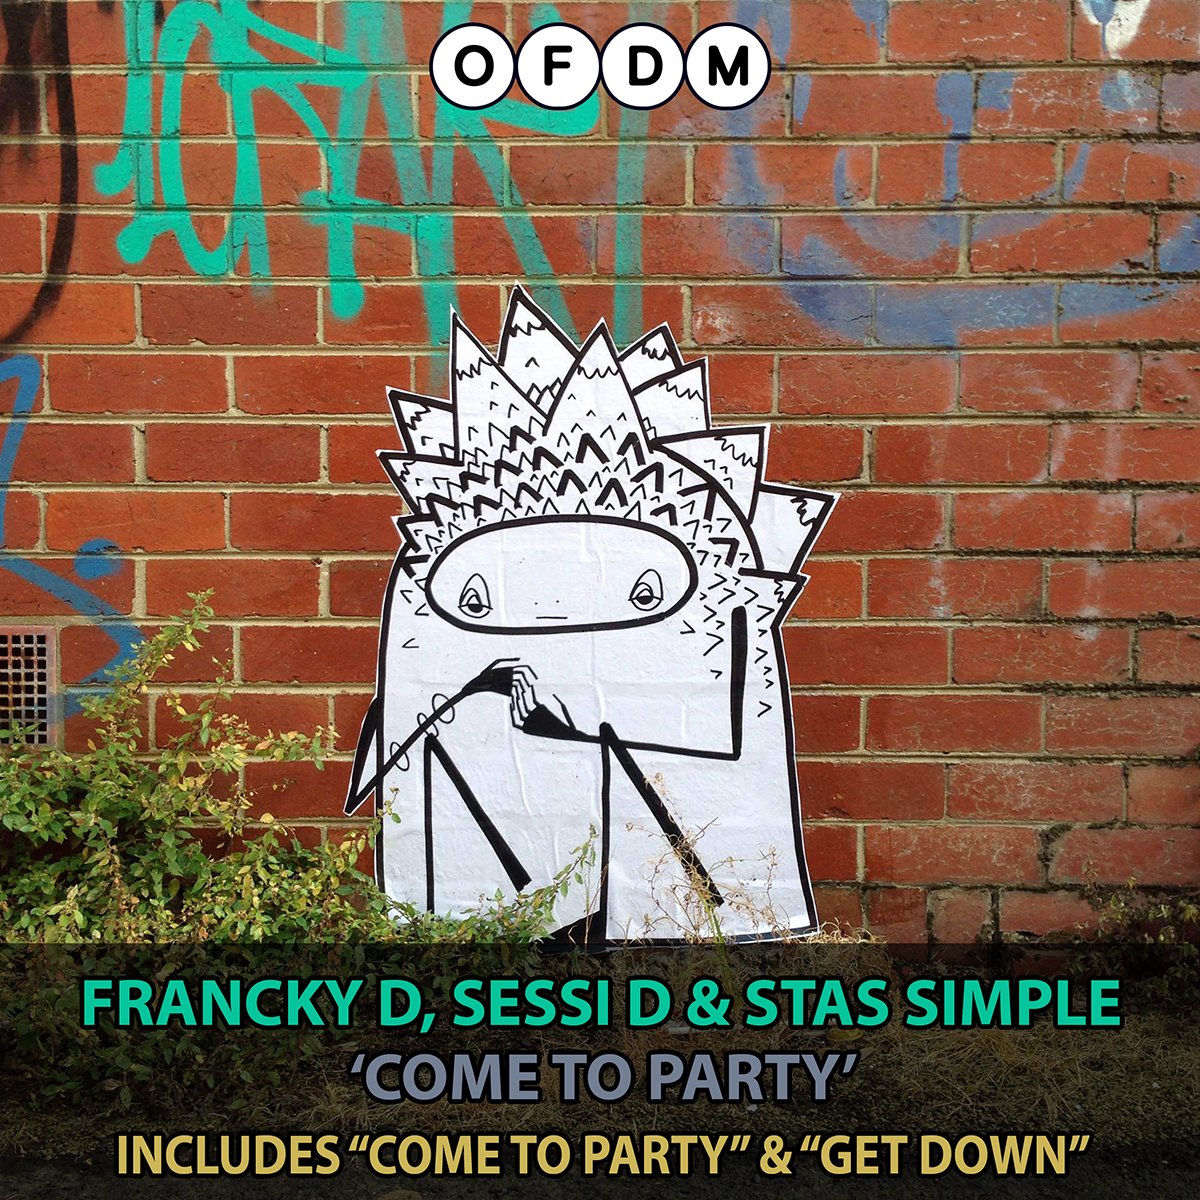 [OFDM109] Francky D, Sessi D & Stas Simple - Come To Party EP (ARTWORK) 1200x1200.jpg